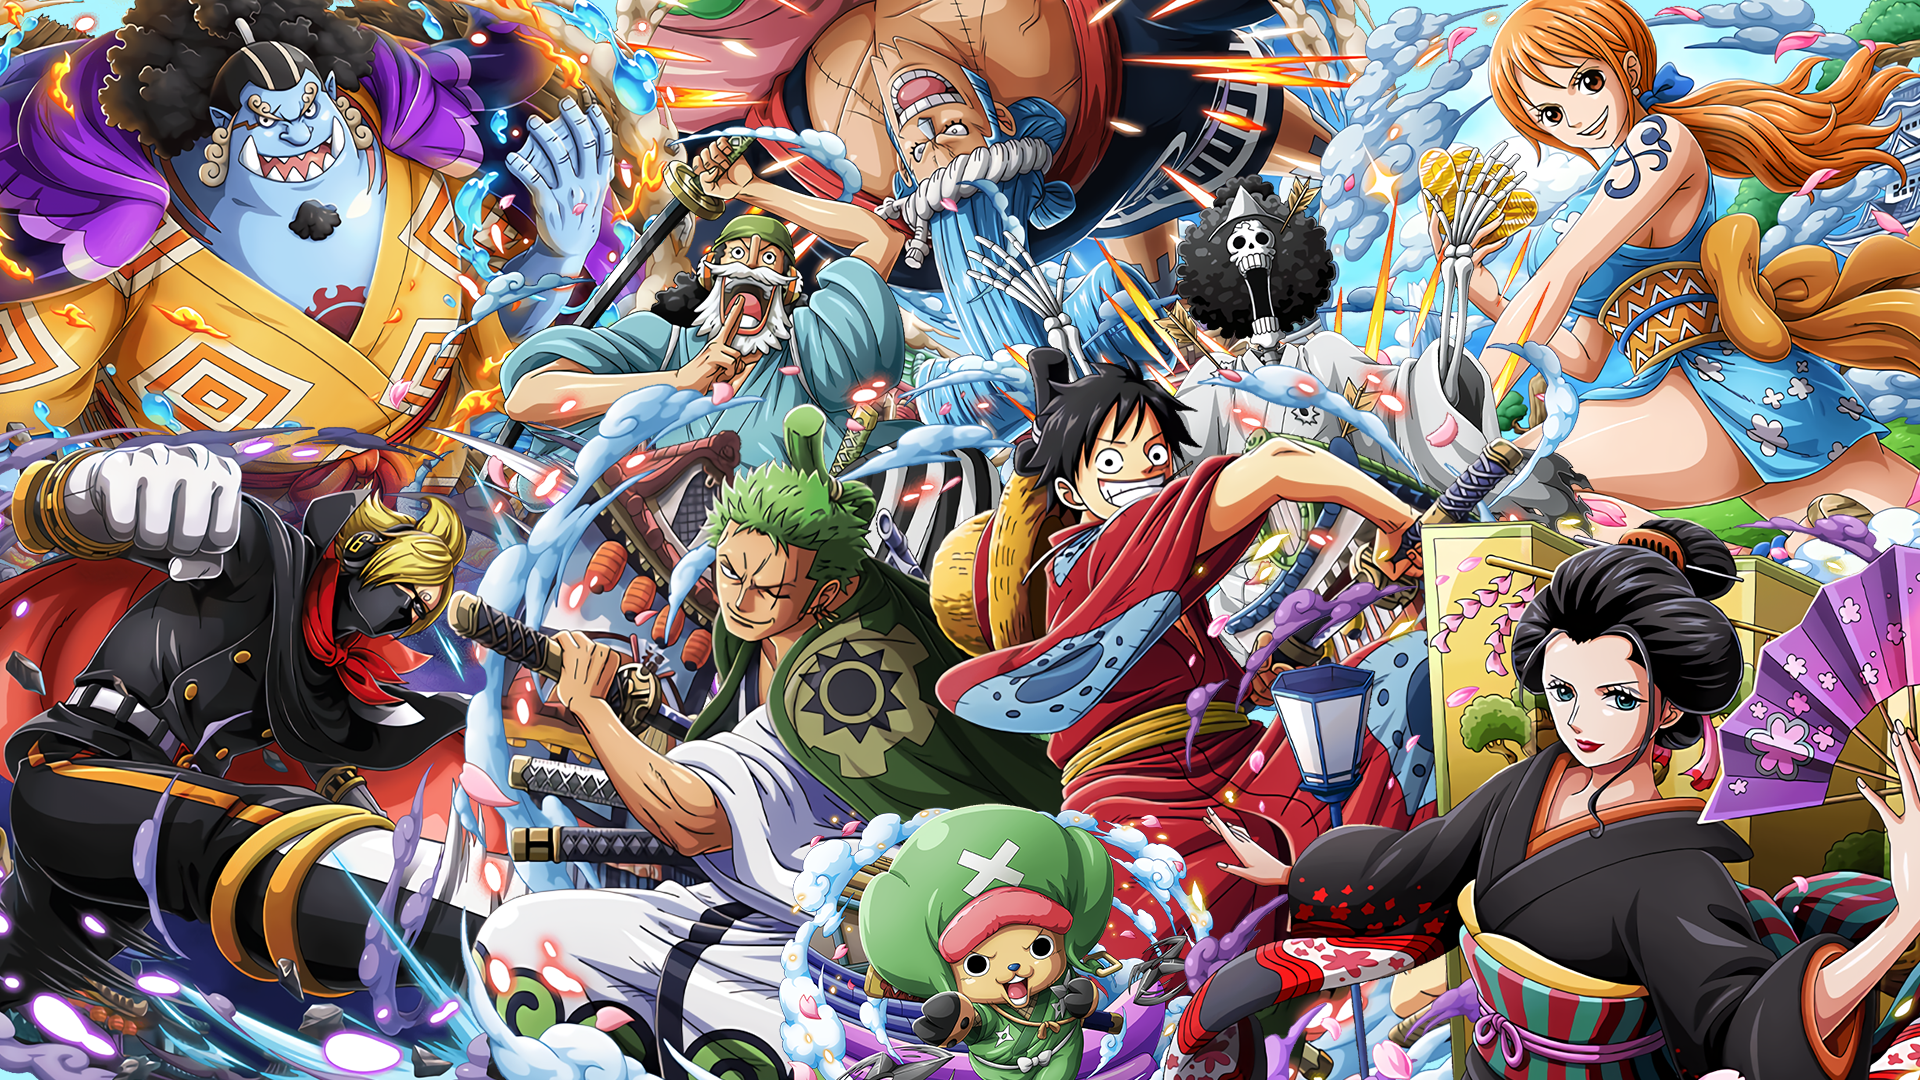 Wano Straw Hats HD Wallpaper (Updated With Jinbe!)